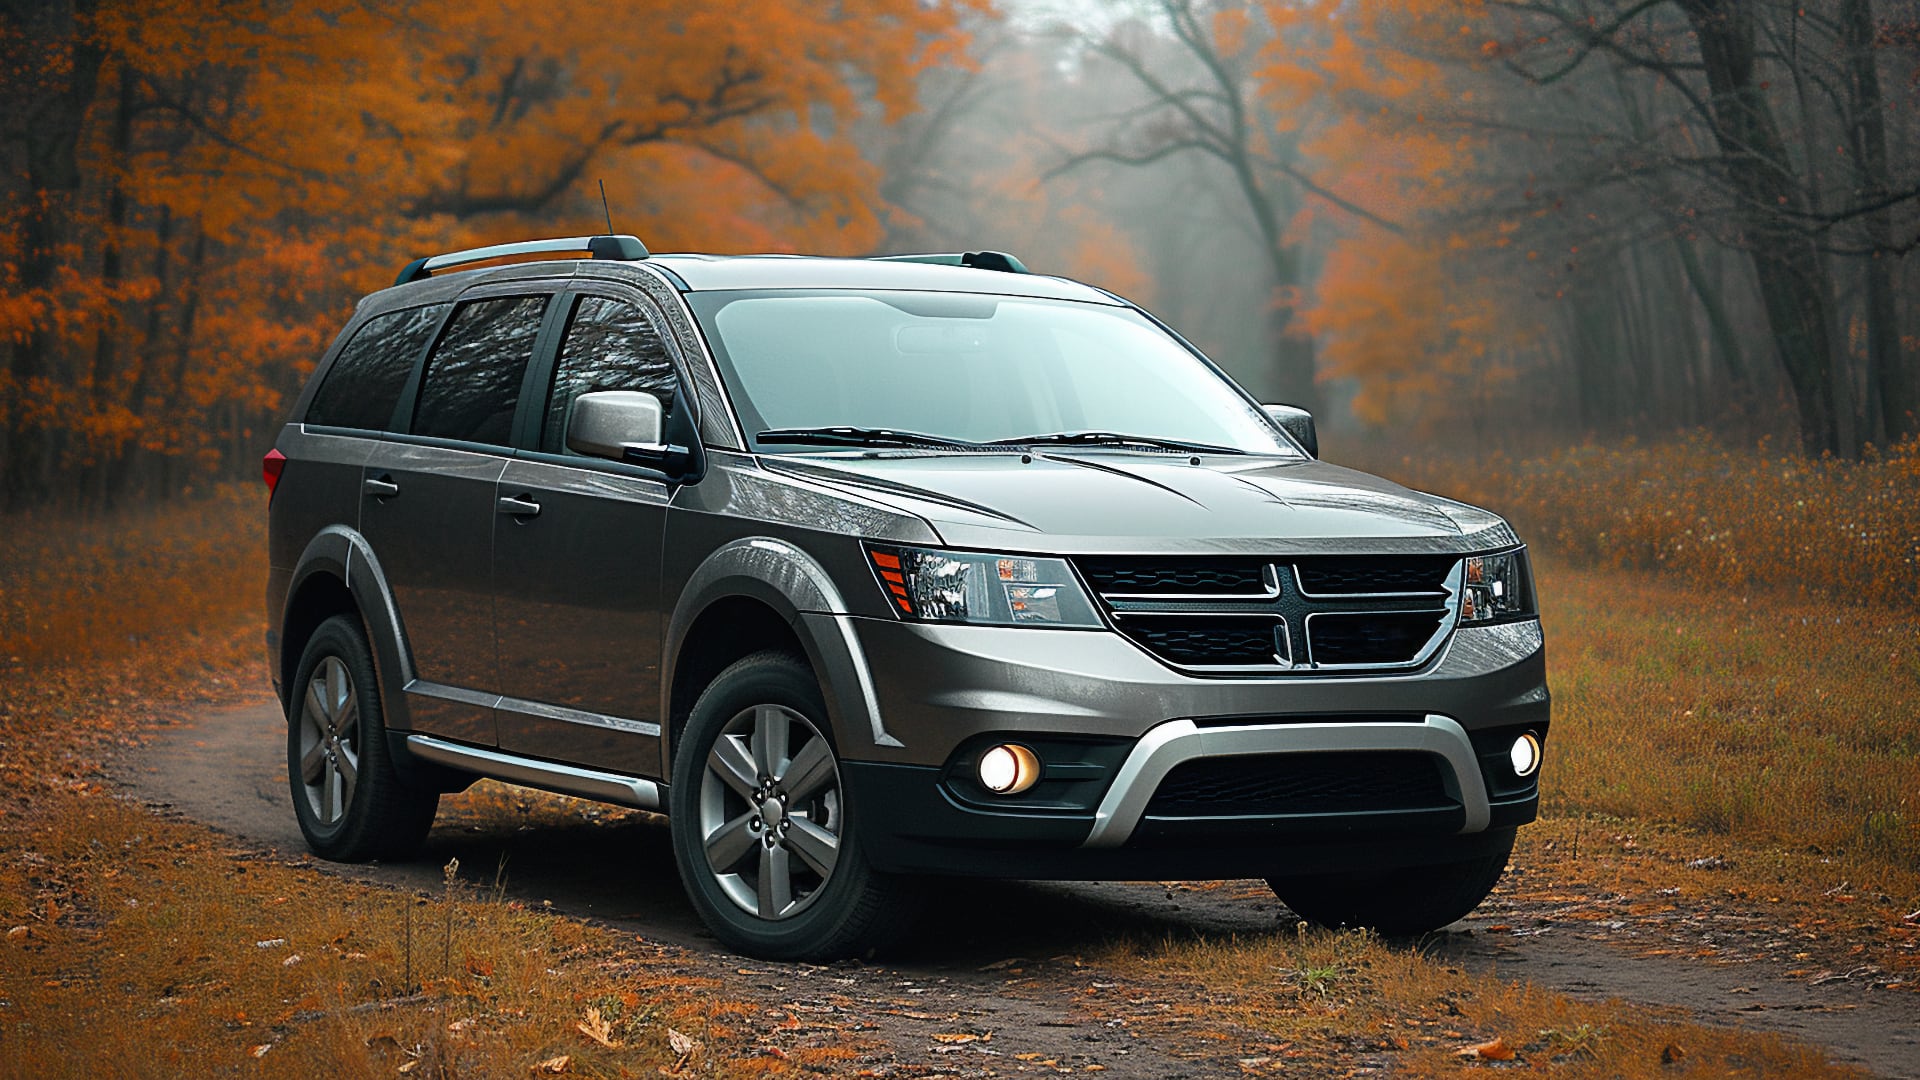 A gray Dodge Journey, one of the years to avoid, driving down a dirt road.